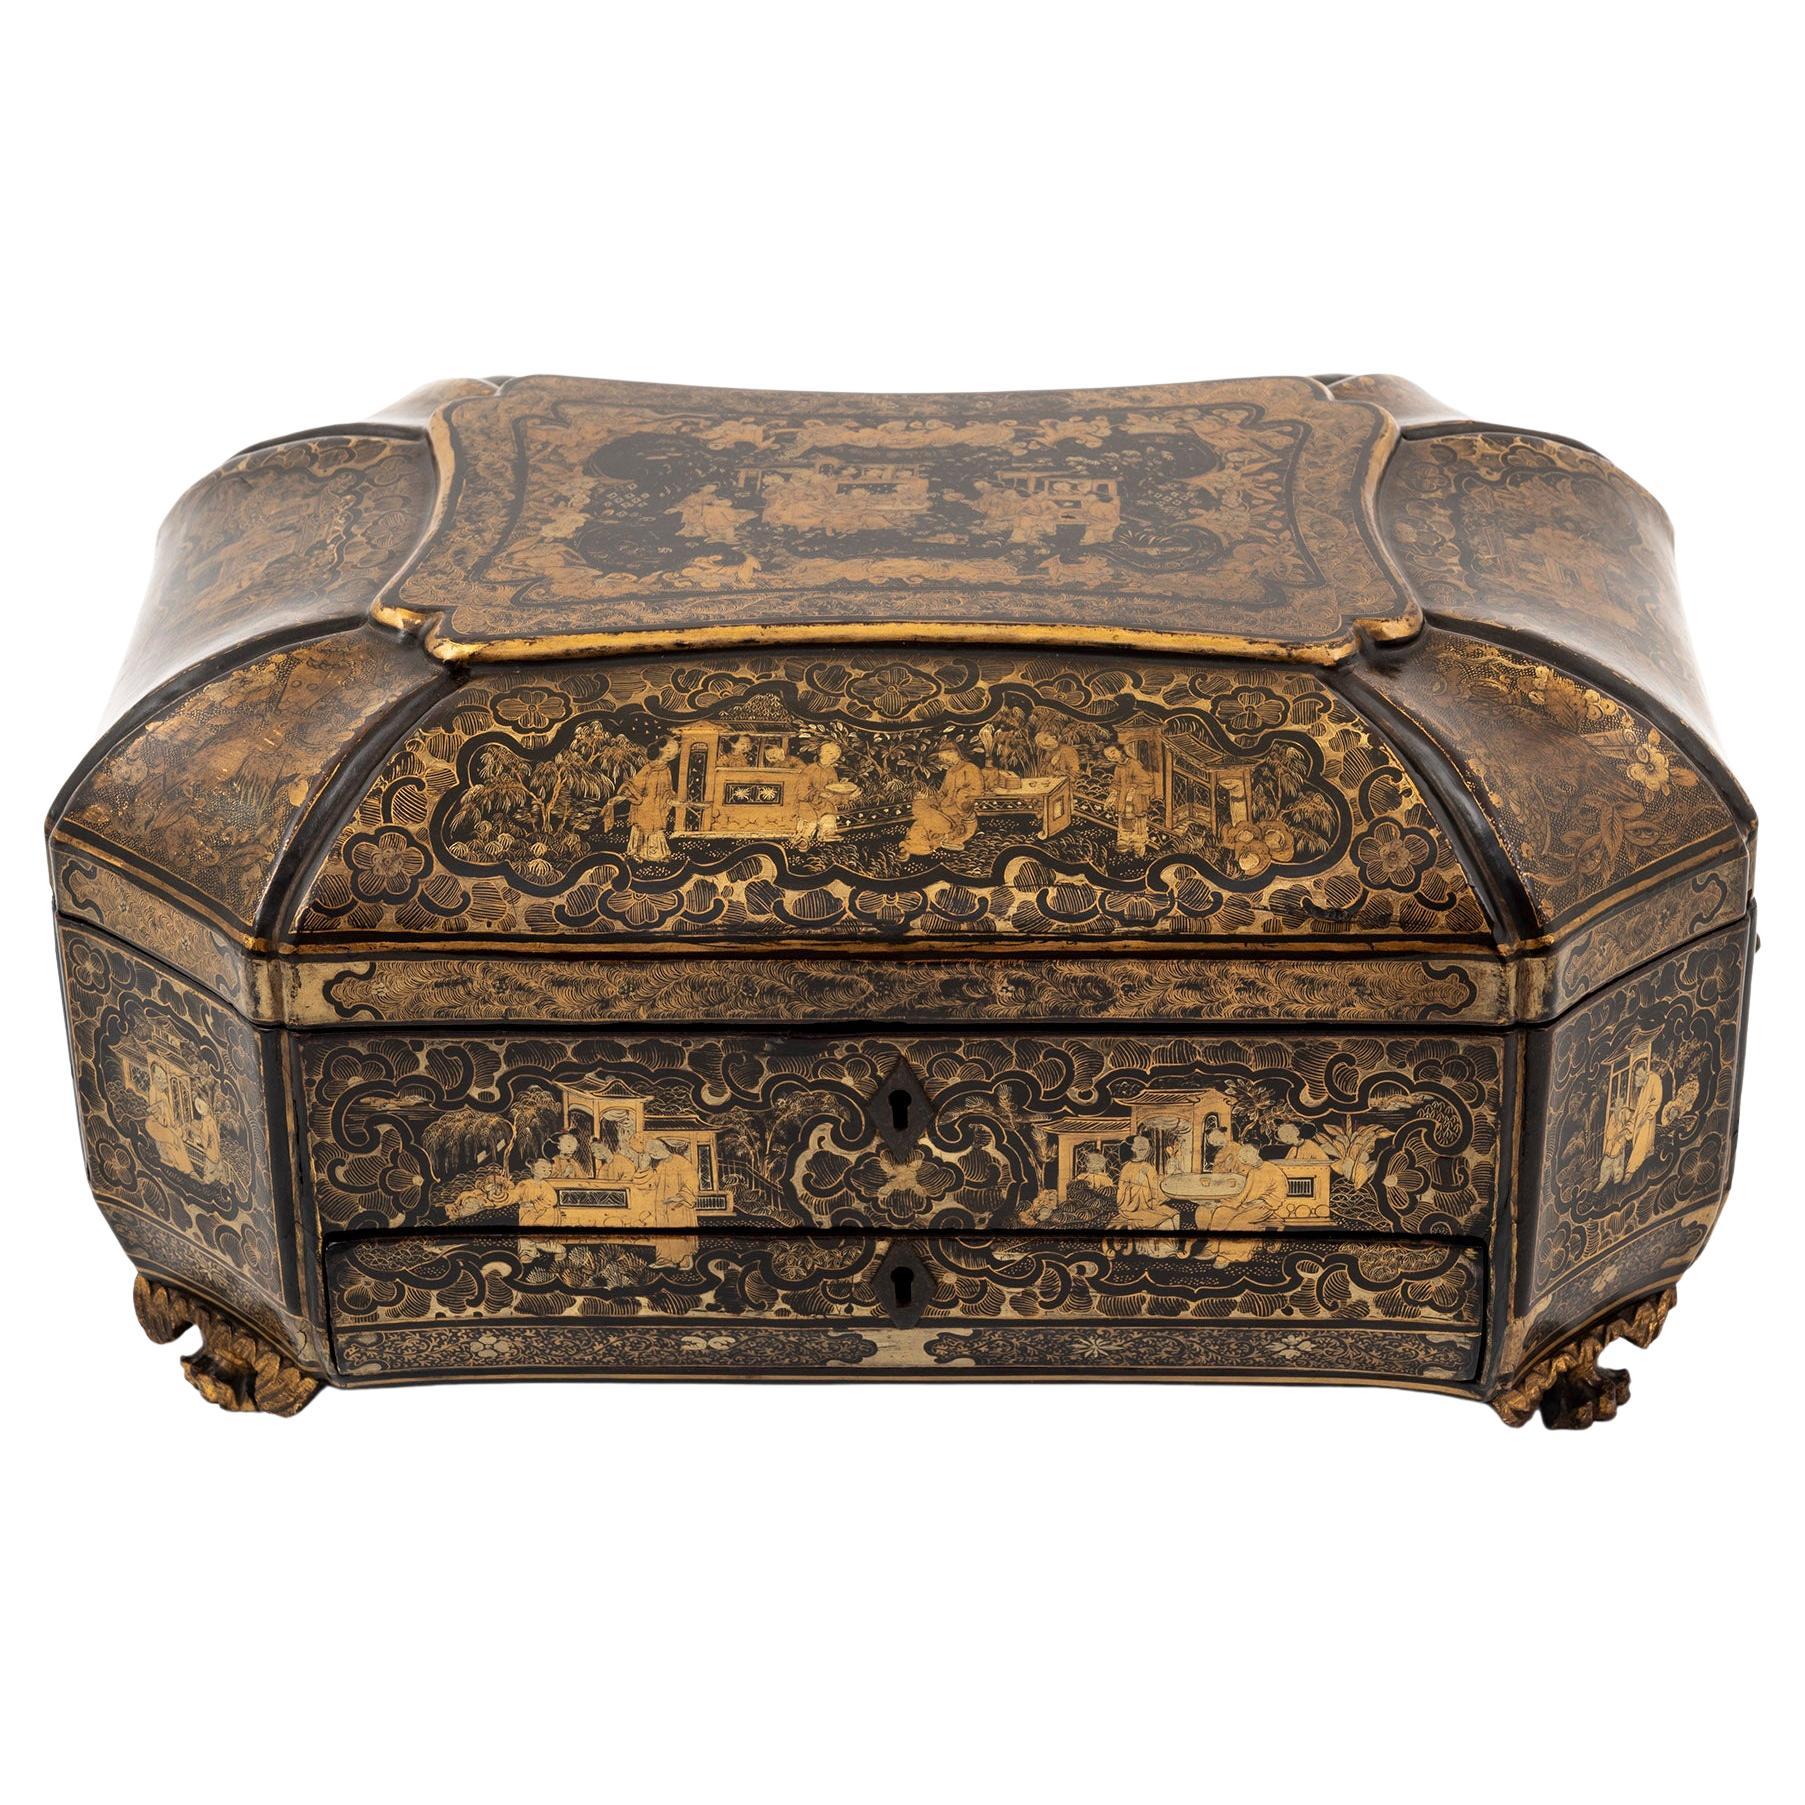 19th Century Antique Chinese Sewing Box For Sale